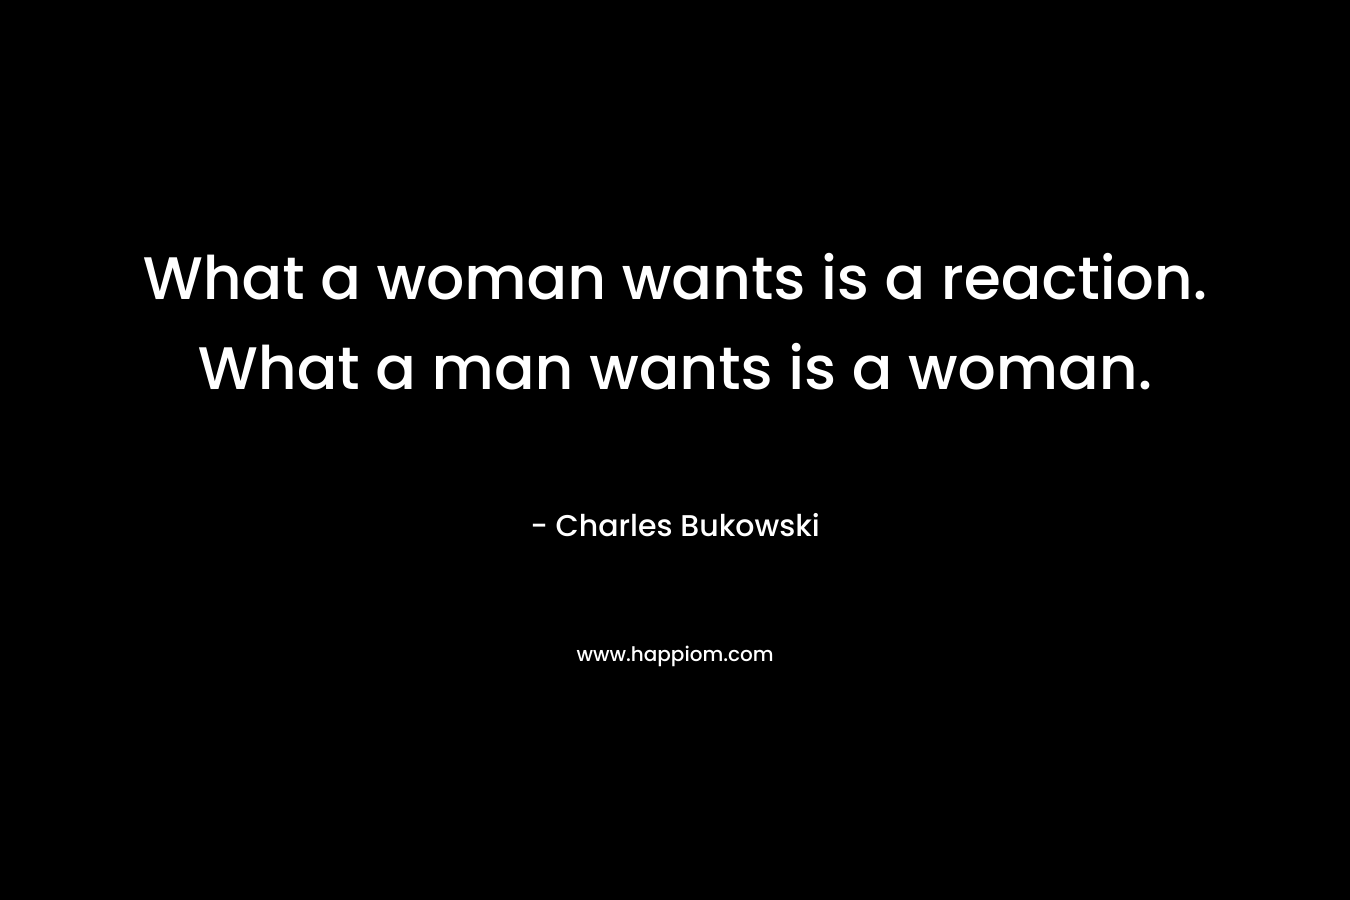 What a woman wants is a reaction. What a man wants is a woman.